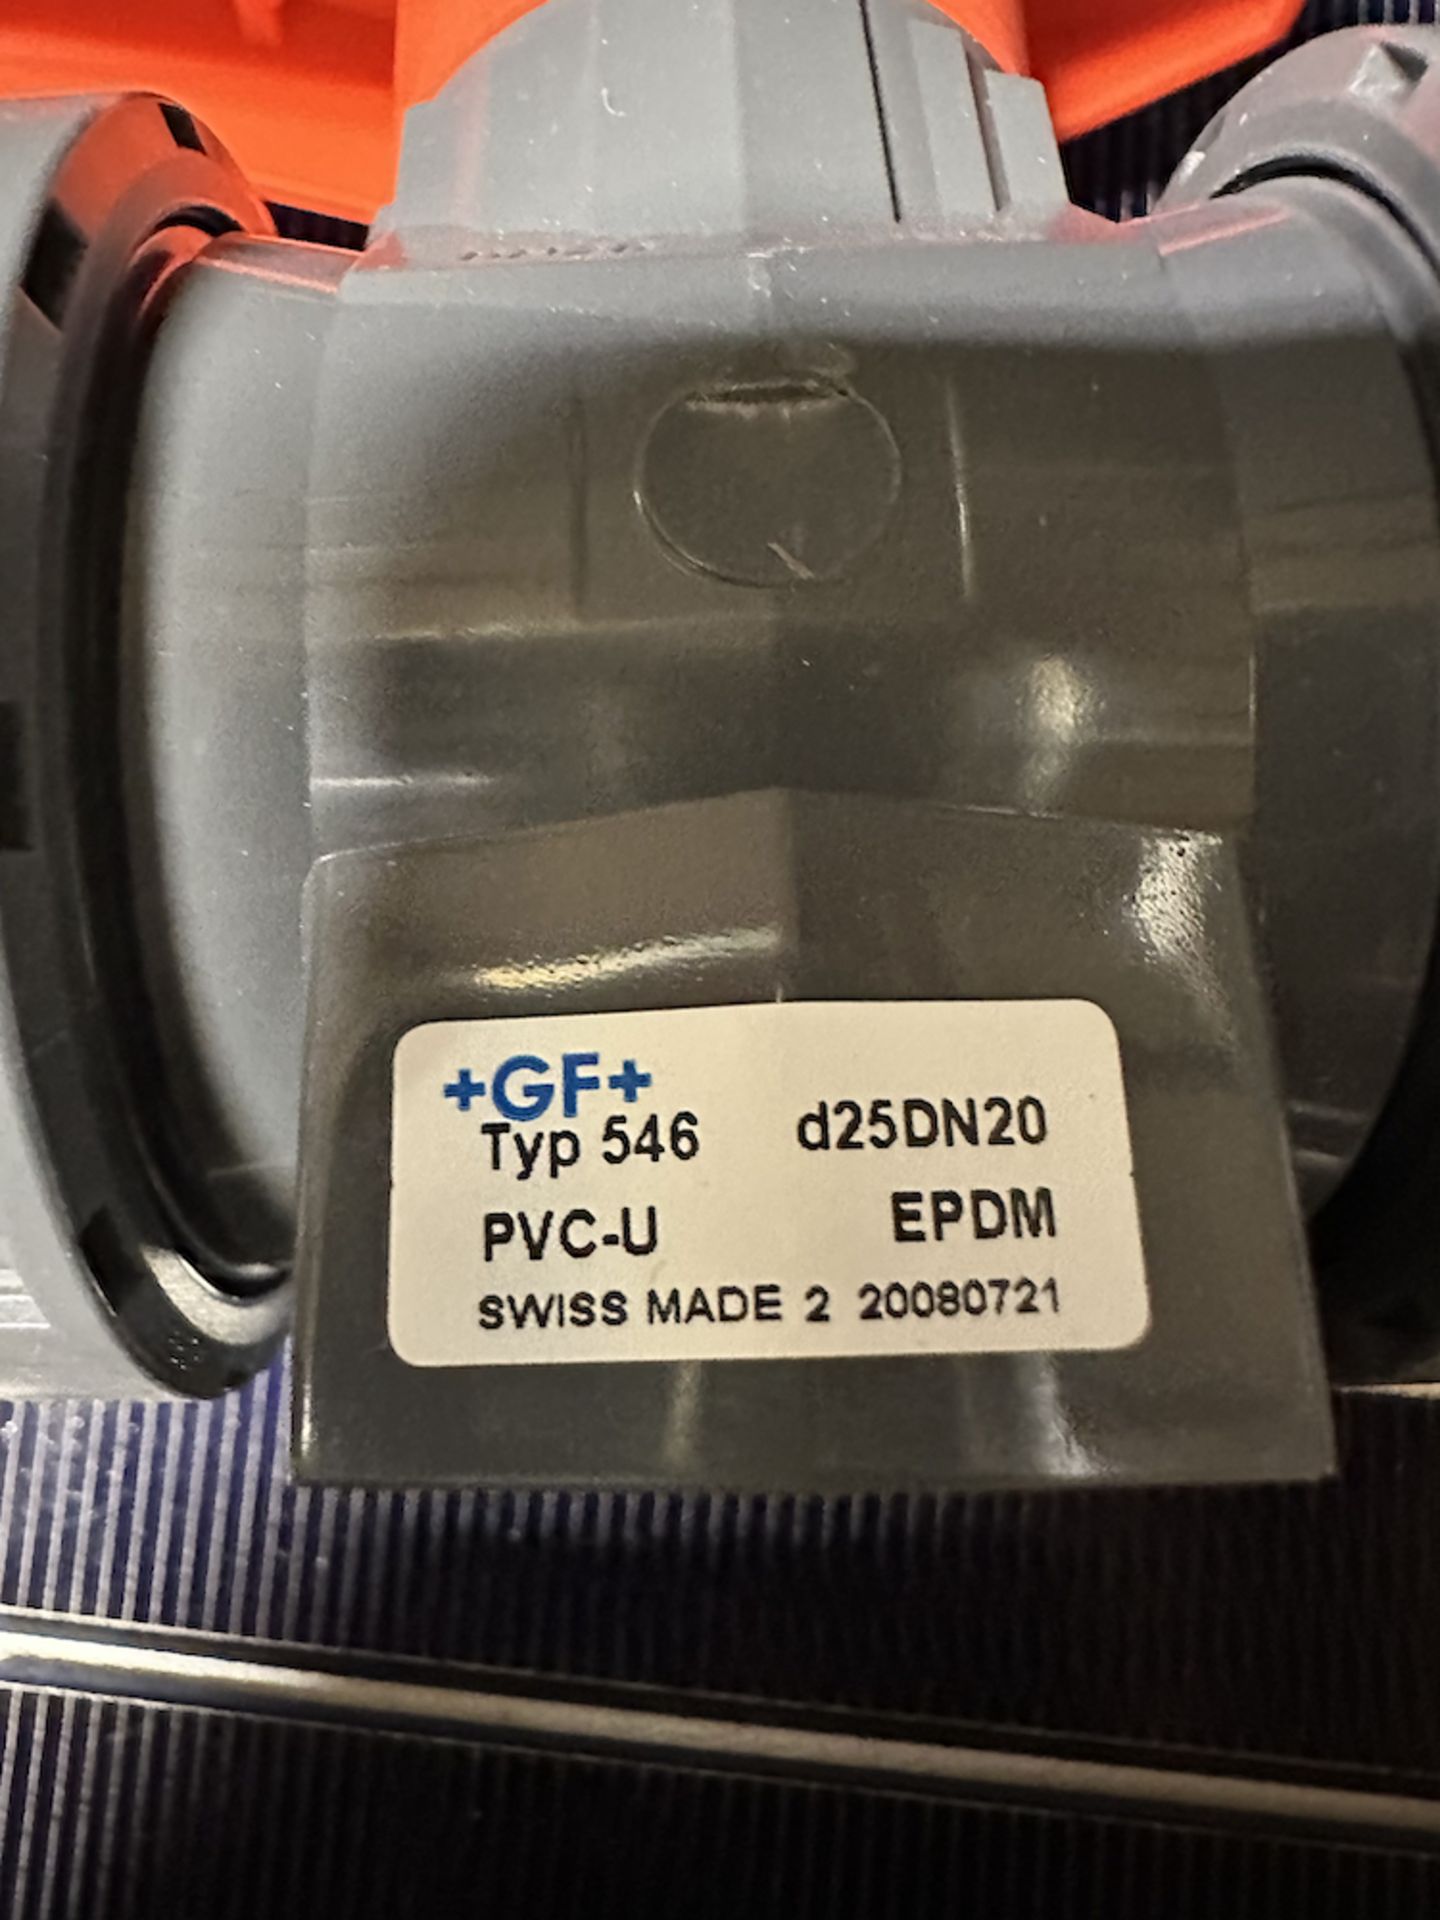 NEW IN THE BOX LOT OF 2 GEORG FISCHER 161546063 DN20 PVC TRUE UNION BALL VALVES - Image 4 of 4